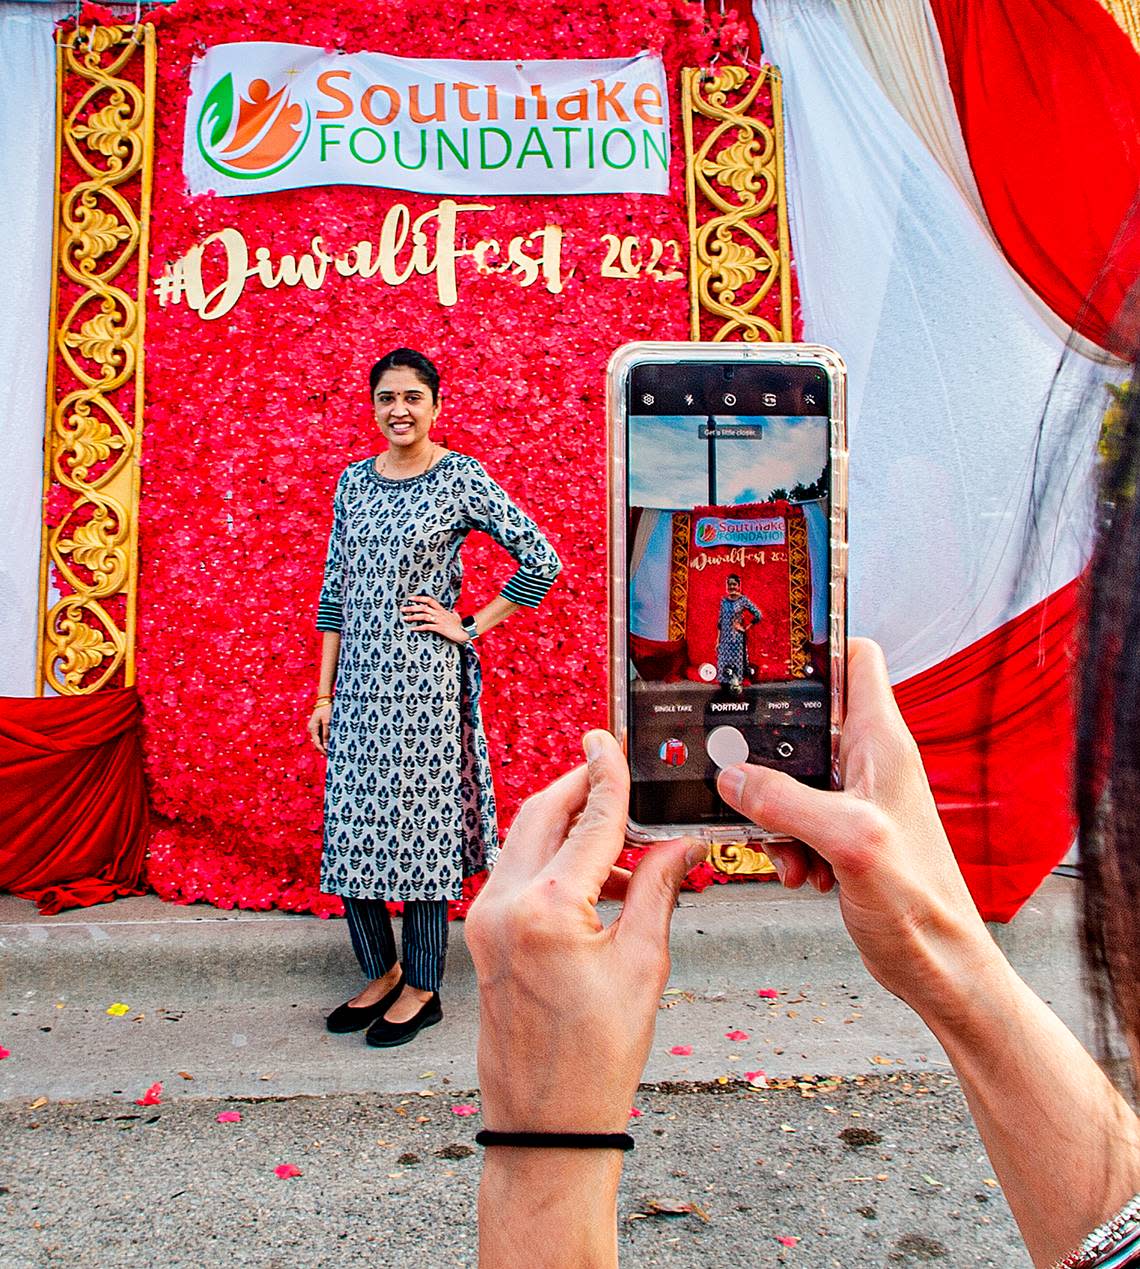 Joan Patel has a friend snap a keepsake photo of her at the Diwali celebration in Southlake, Texas, Saturday, Oct. 22, 2022.